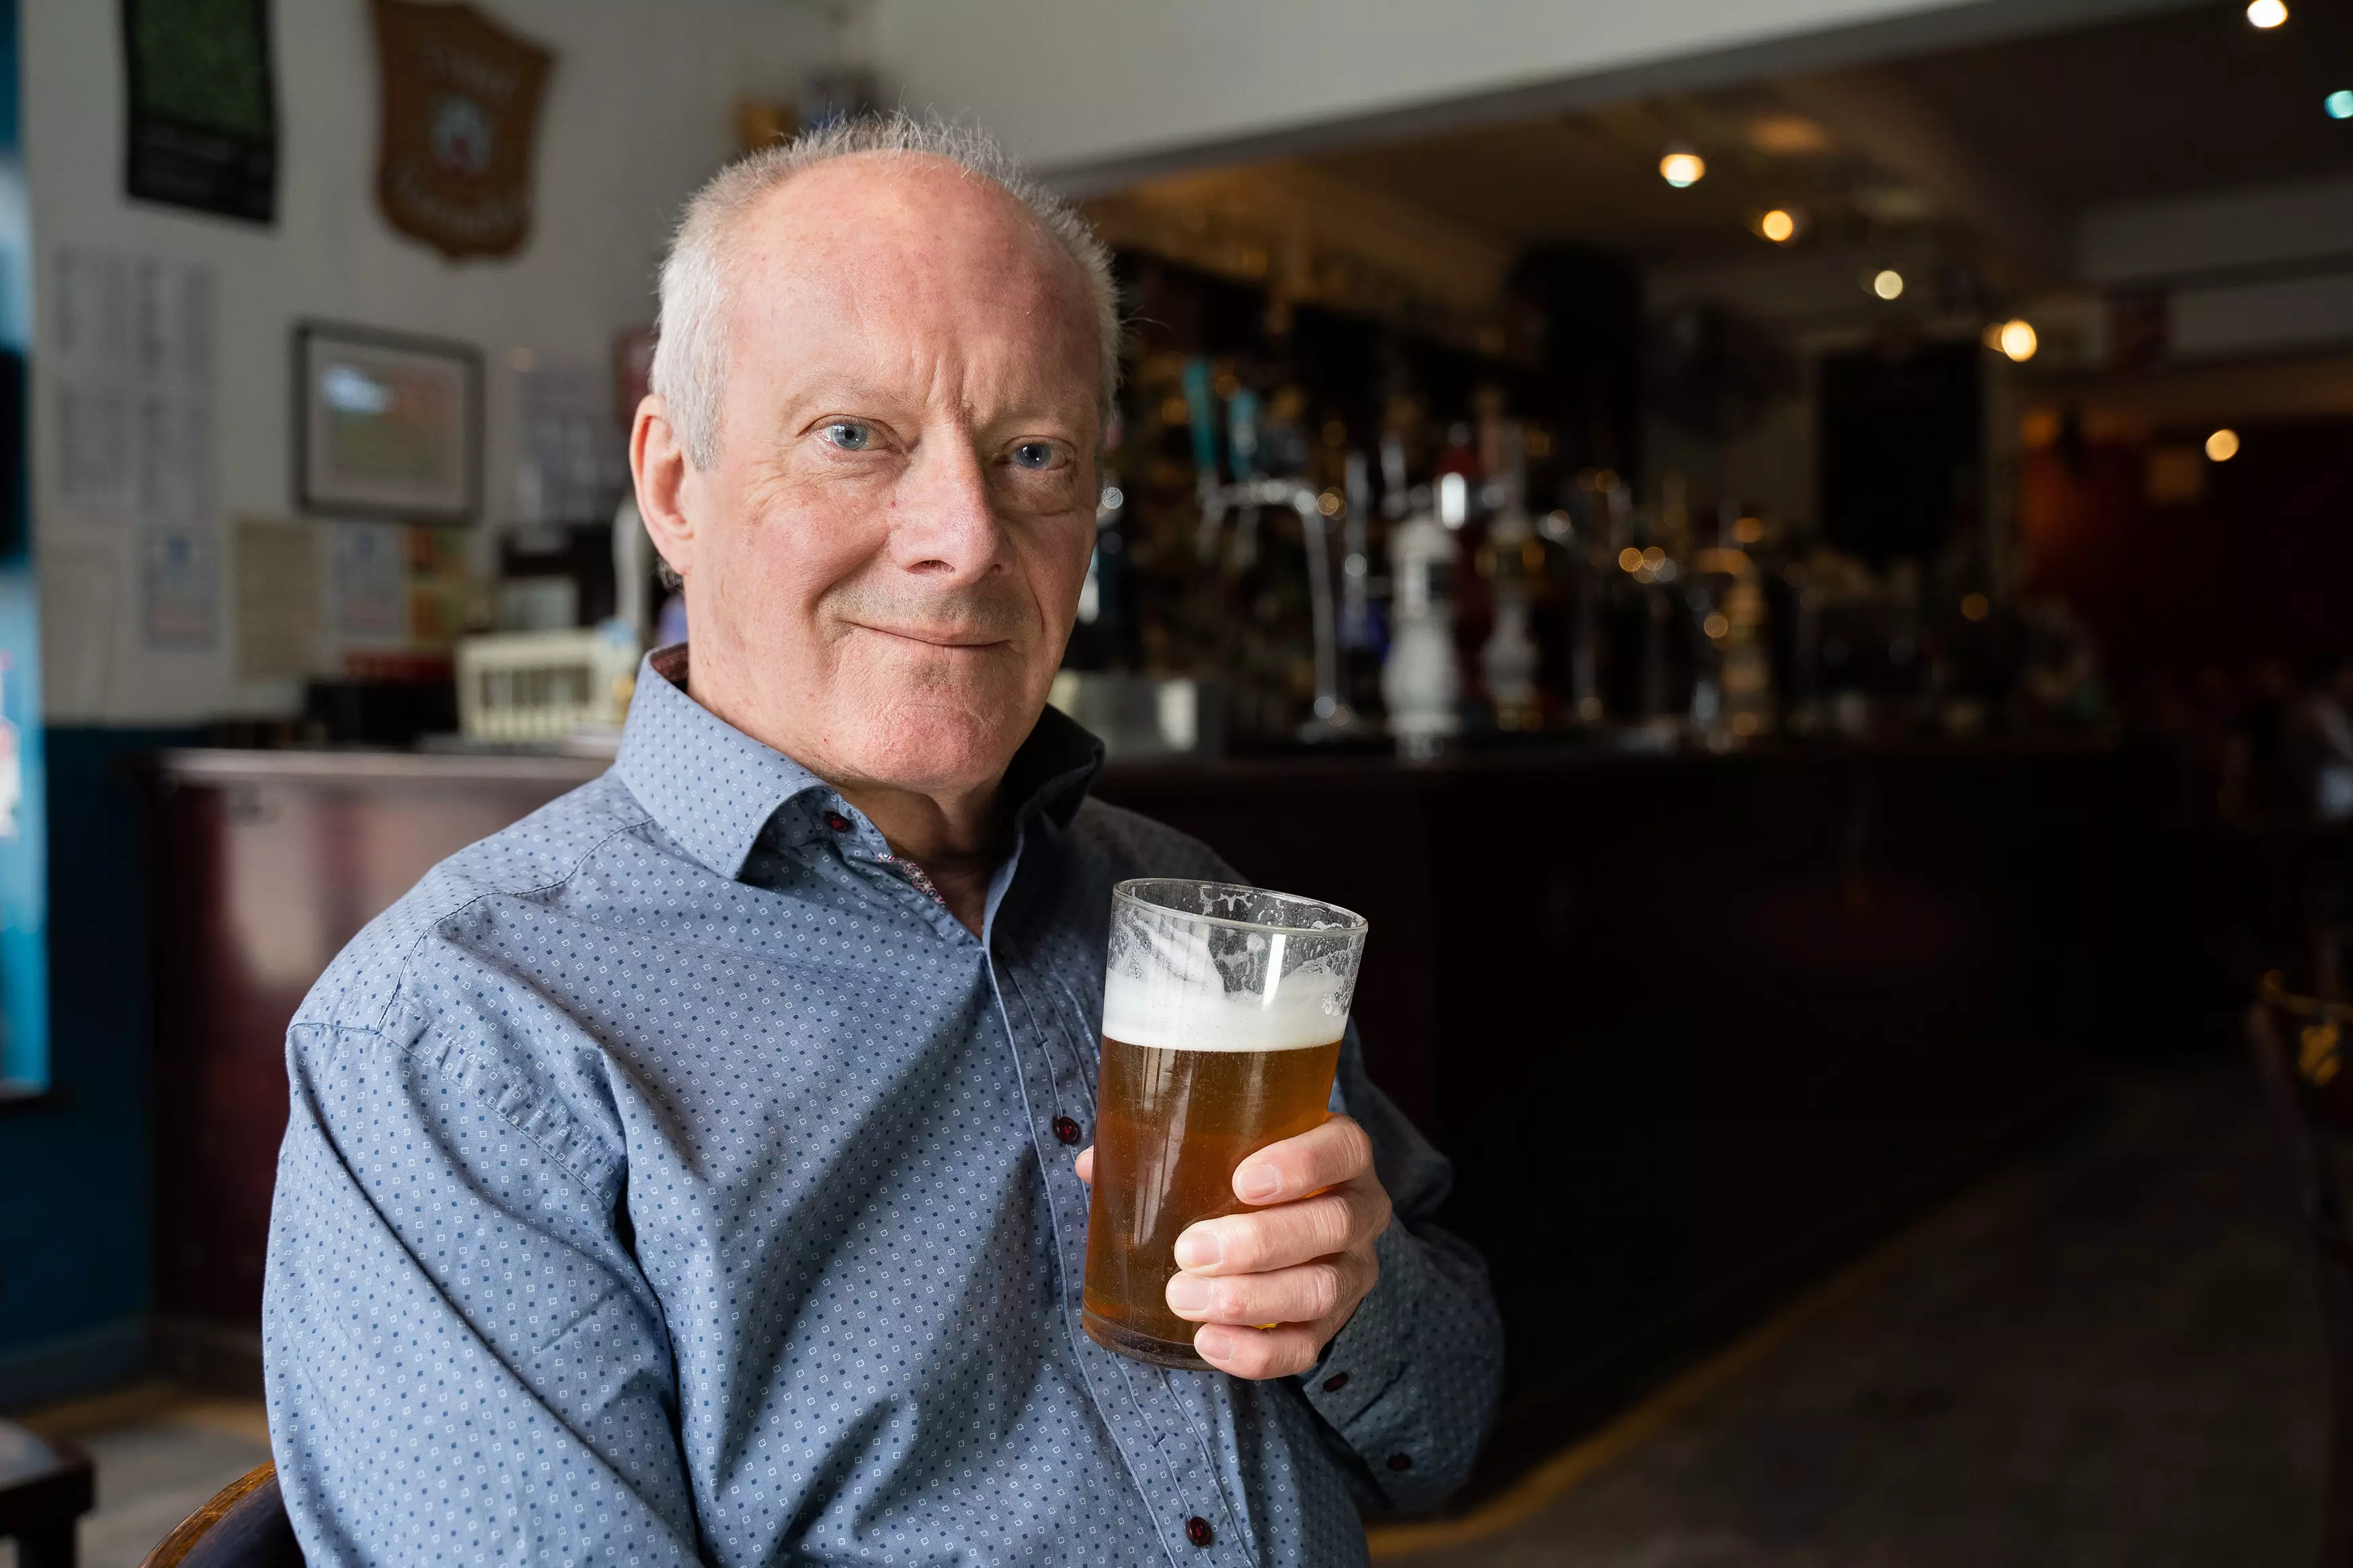 He has visited more than 50,000 pubs over five decades.